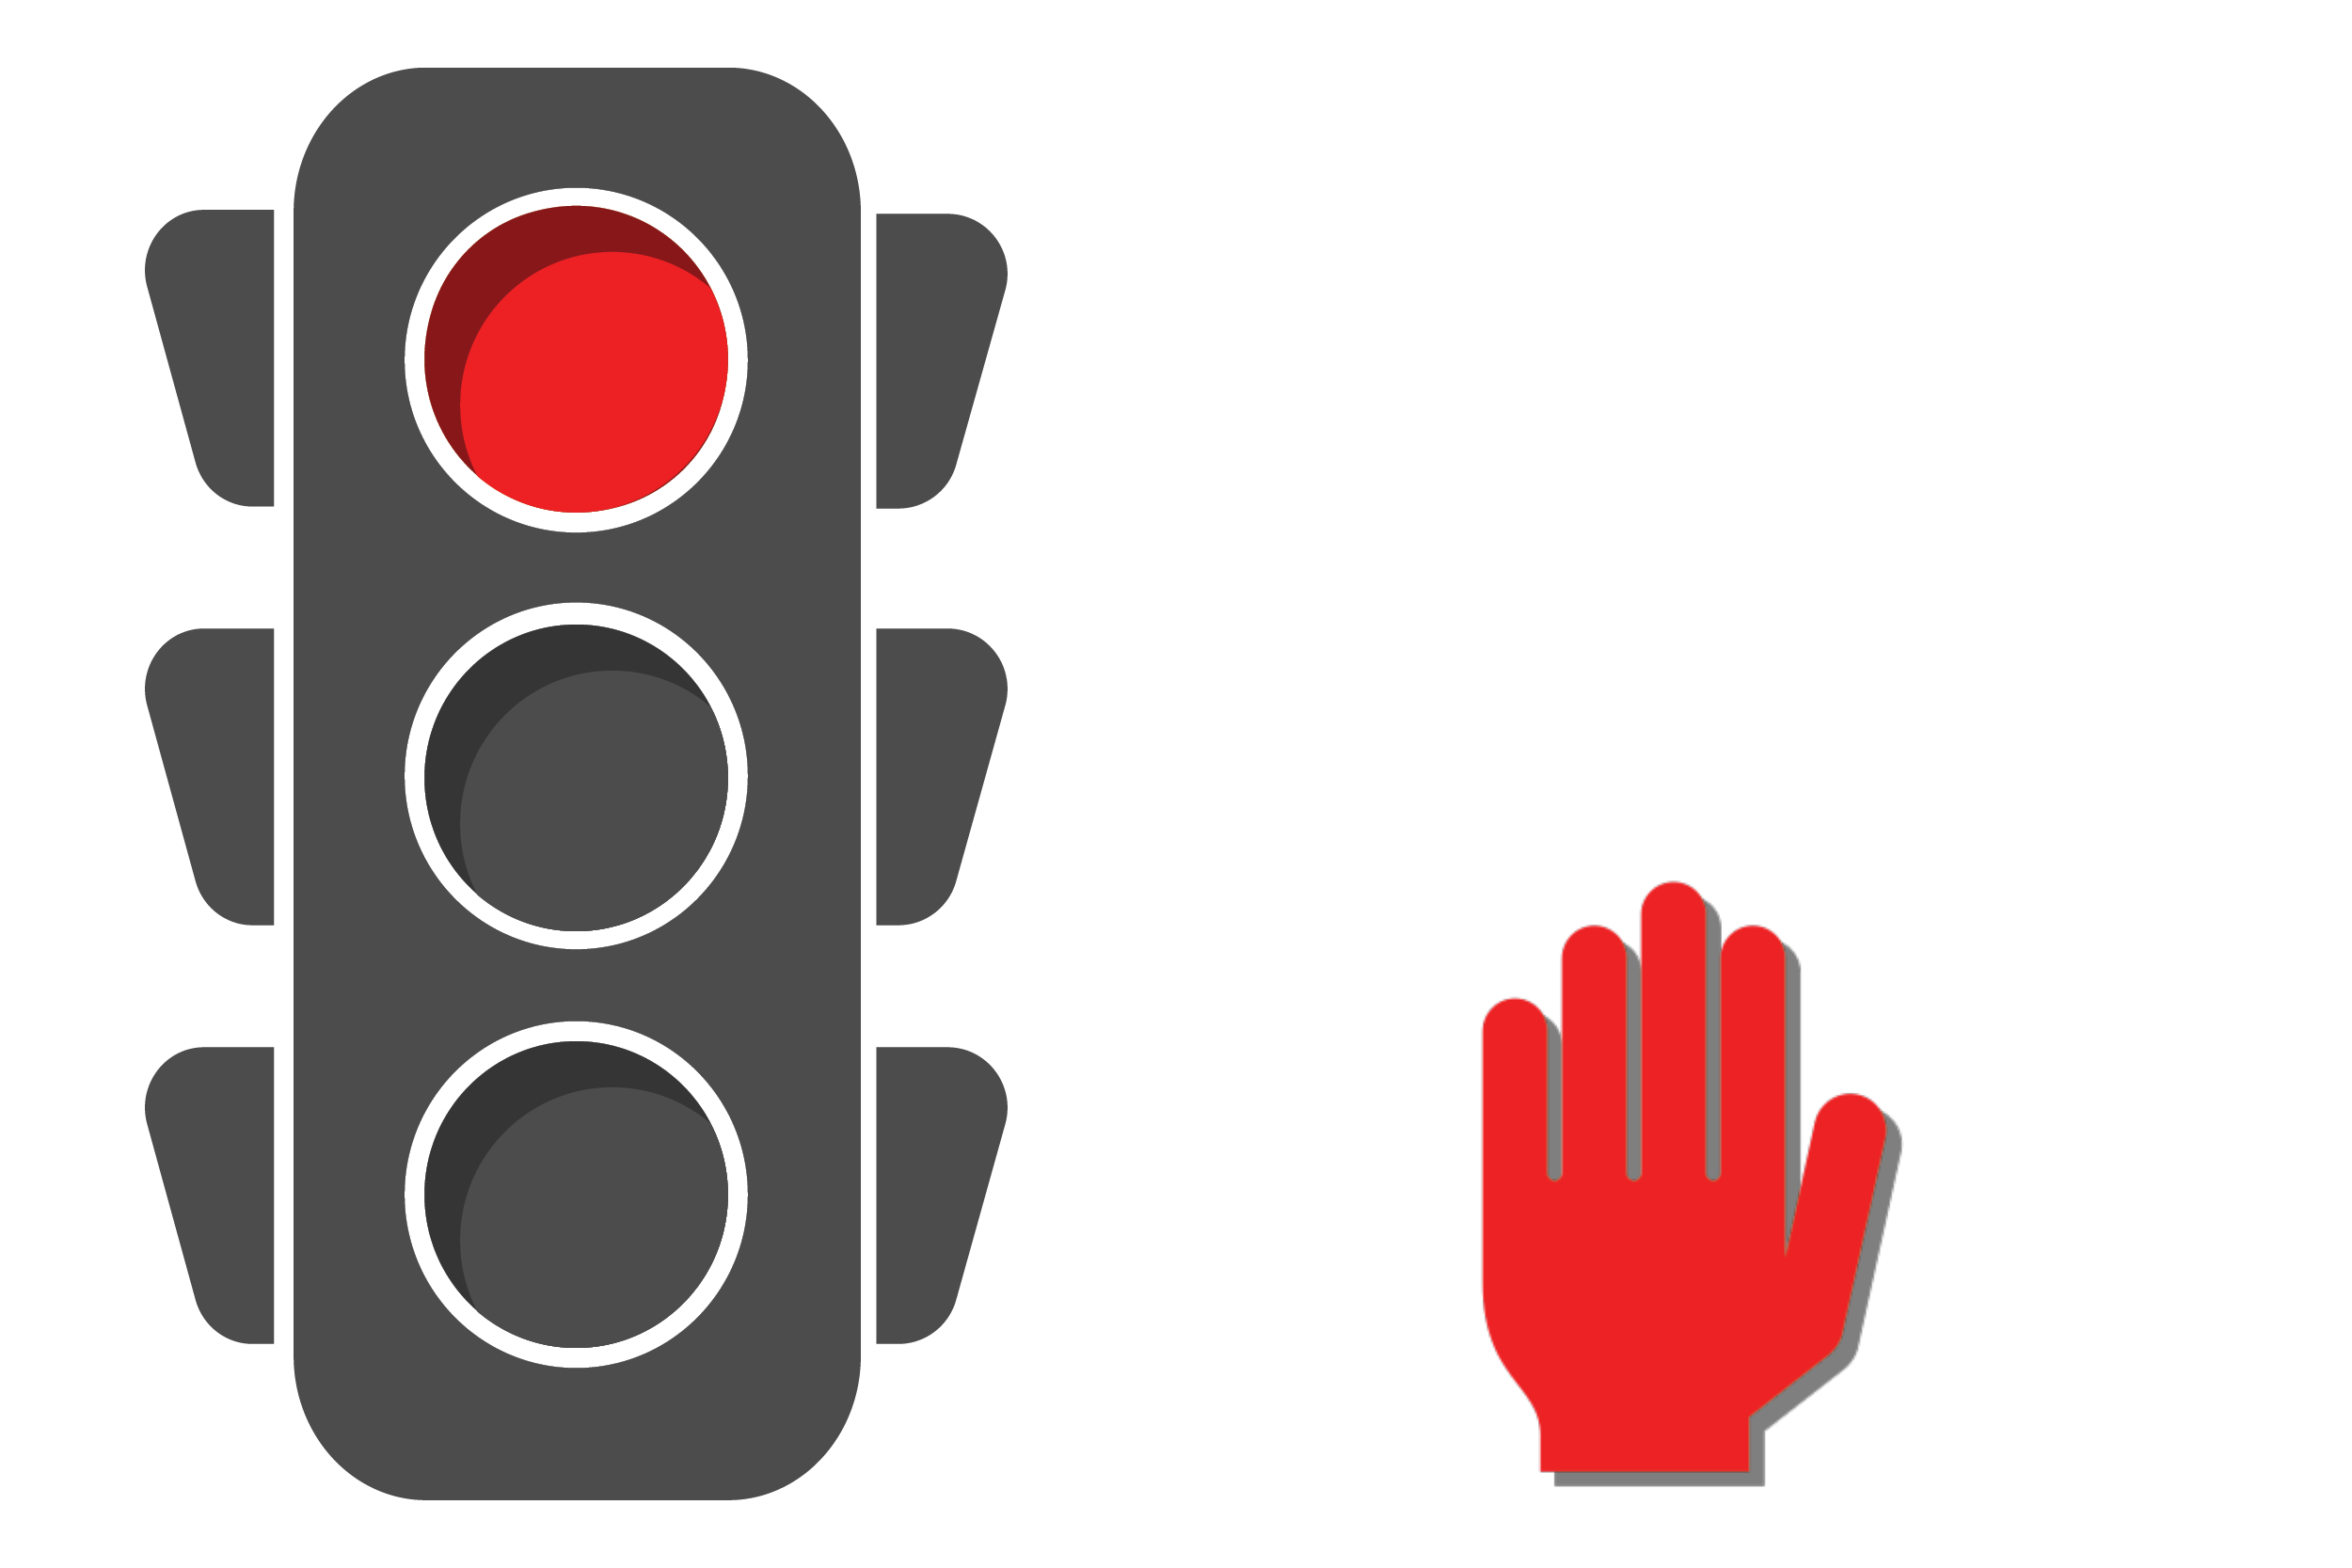 Stop light with red light and a hand icon indicating 'stop'